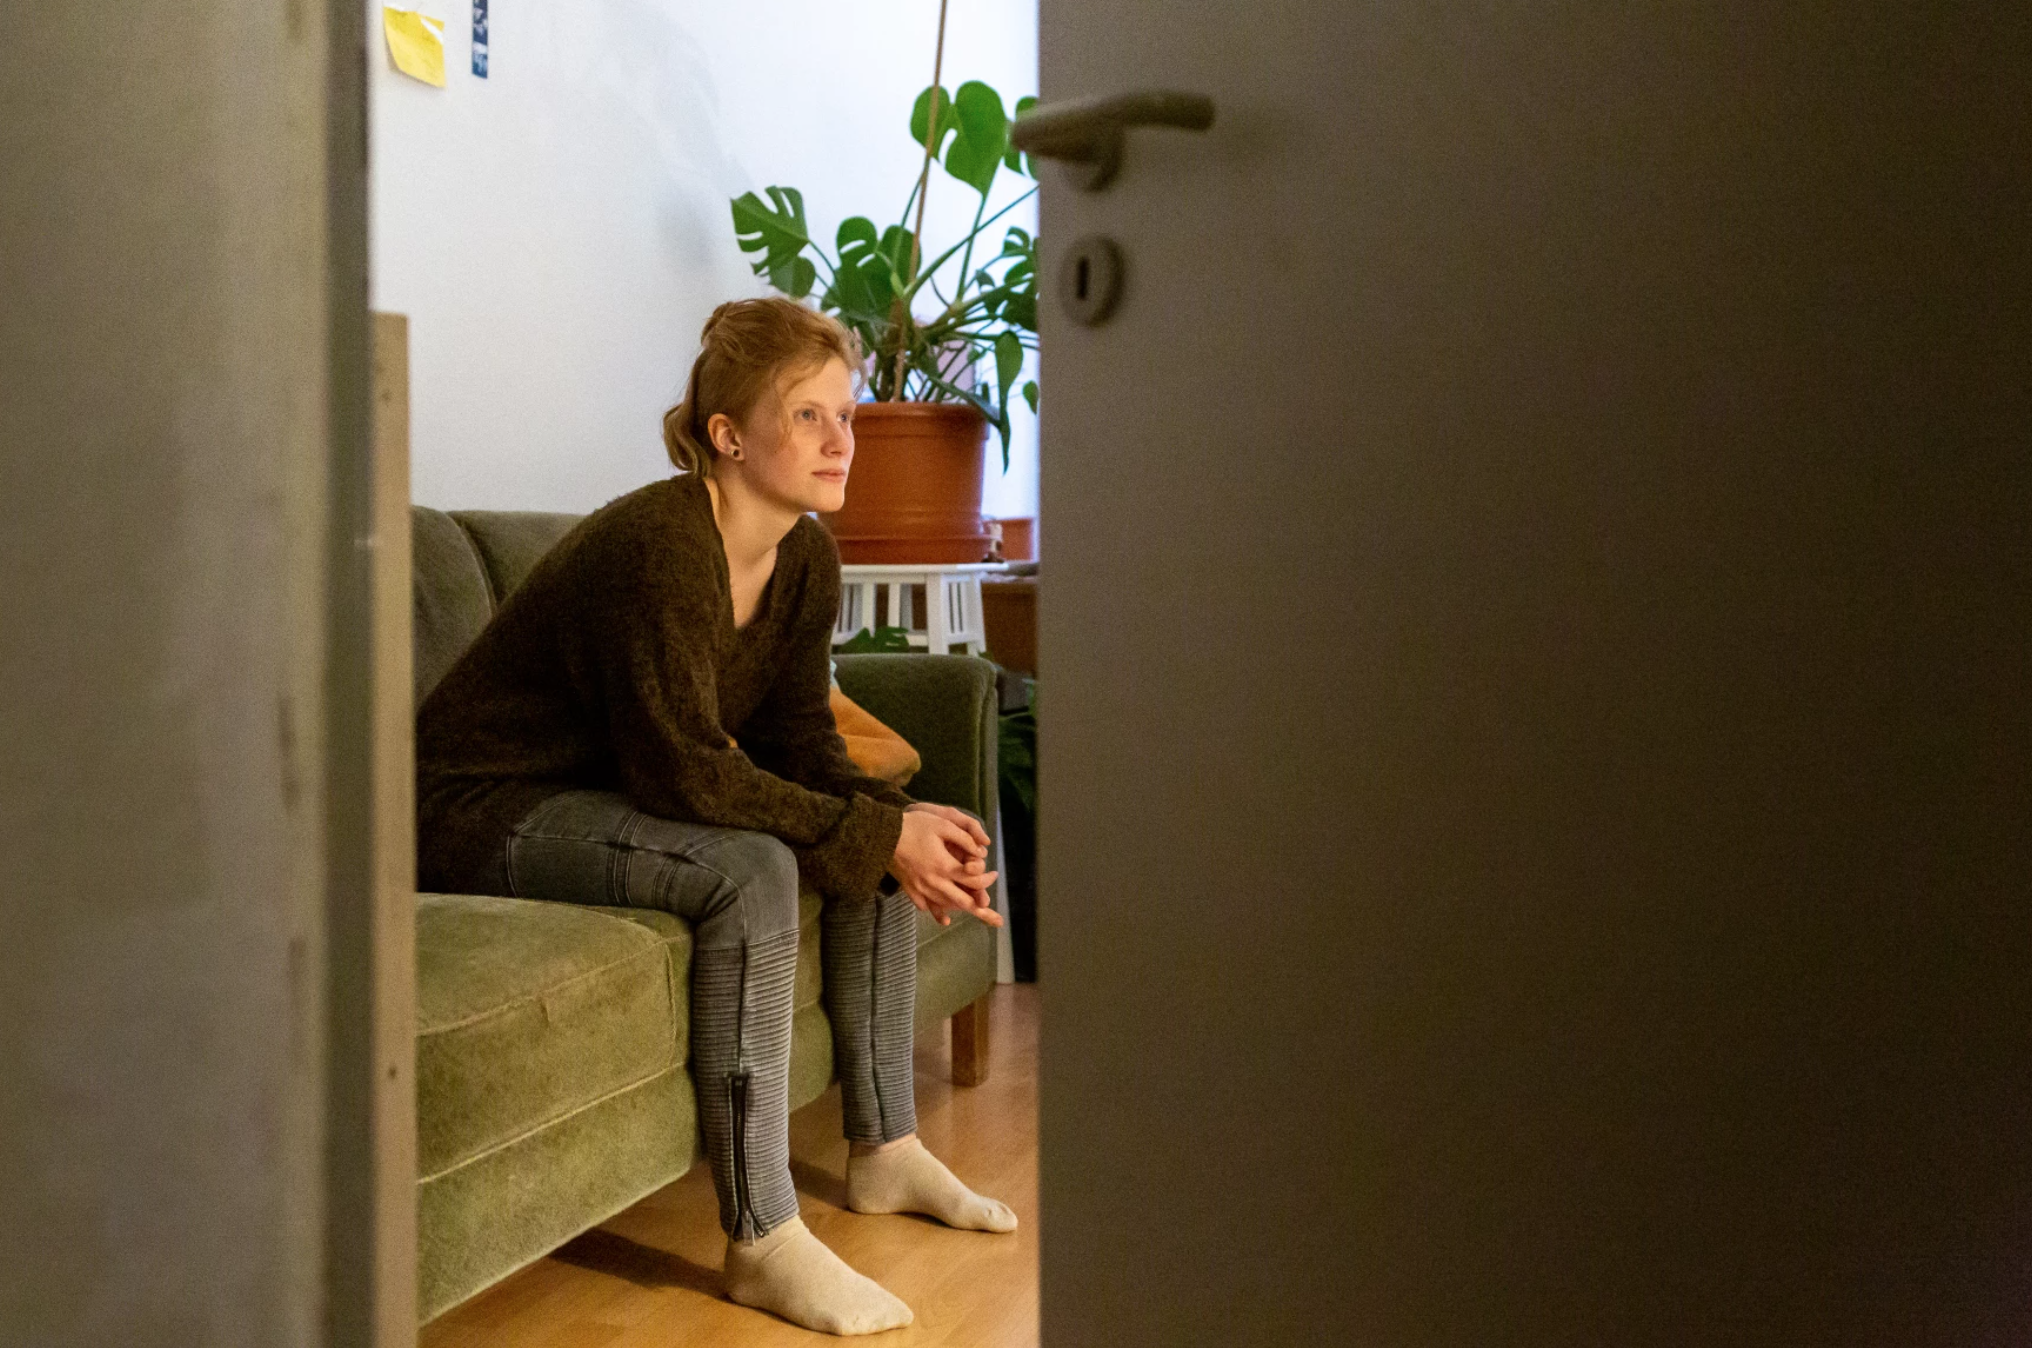 Anika Färber, a youth trainer with the Network for Democracy and Courage in Germany, at her home in Erfurt, Germany. Image by Ryan Delaney/St. Louis Public Radio. 